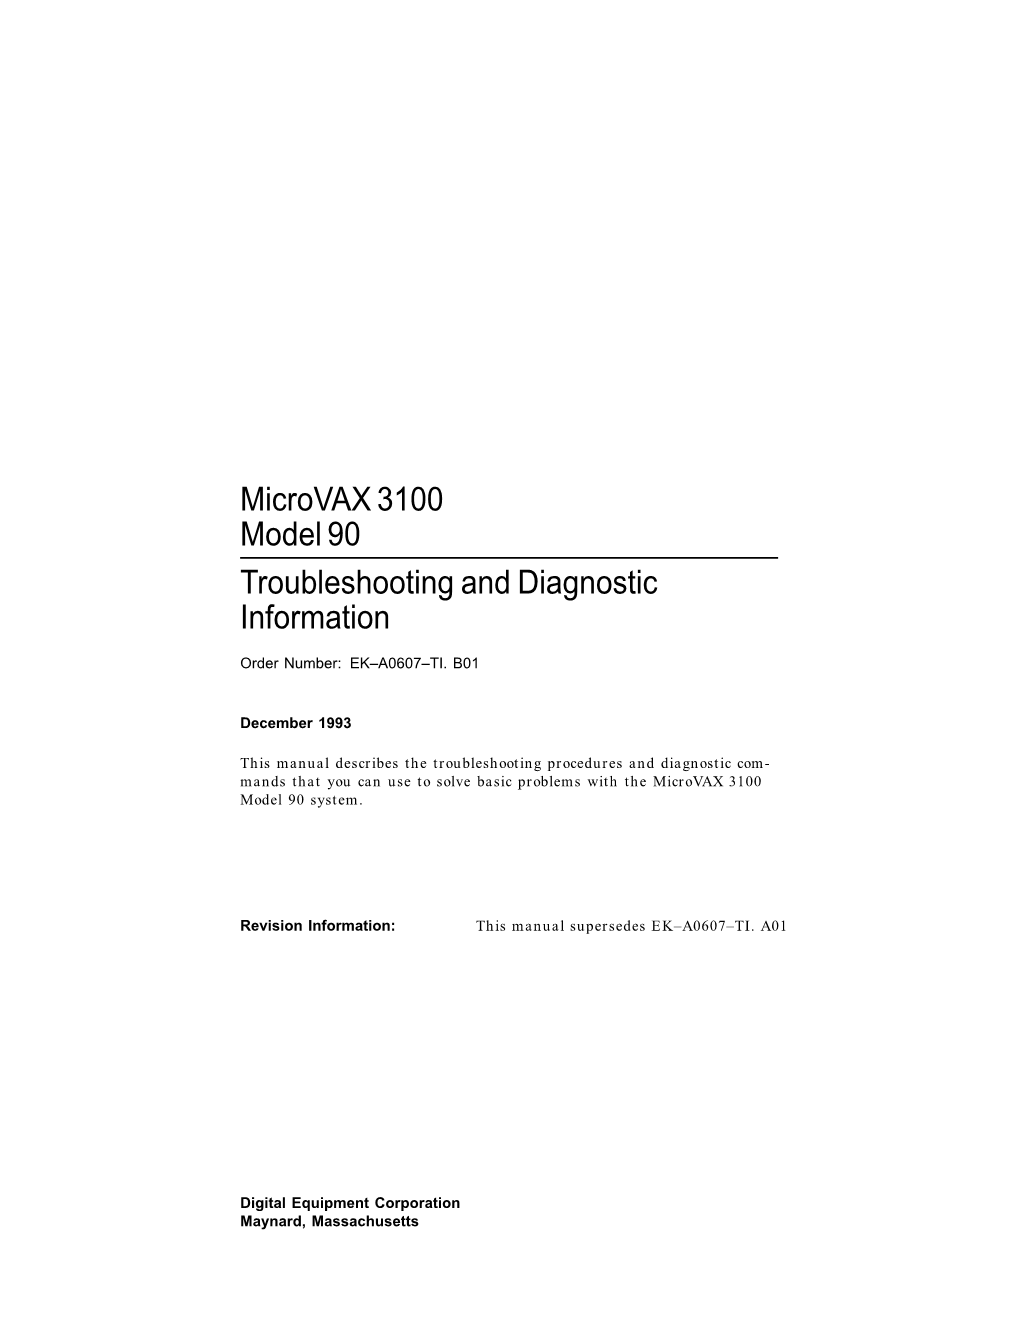 Microvax 3100 Model 90 Troubleshooting and Diag Information